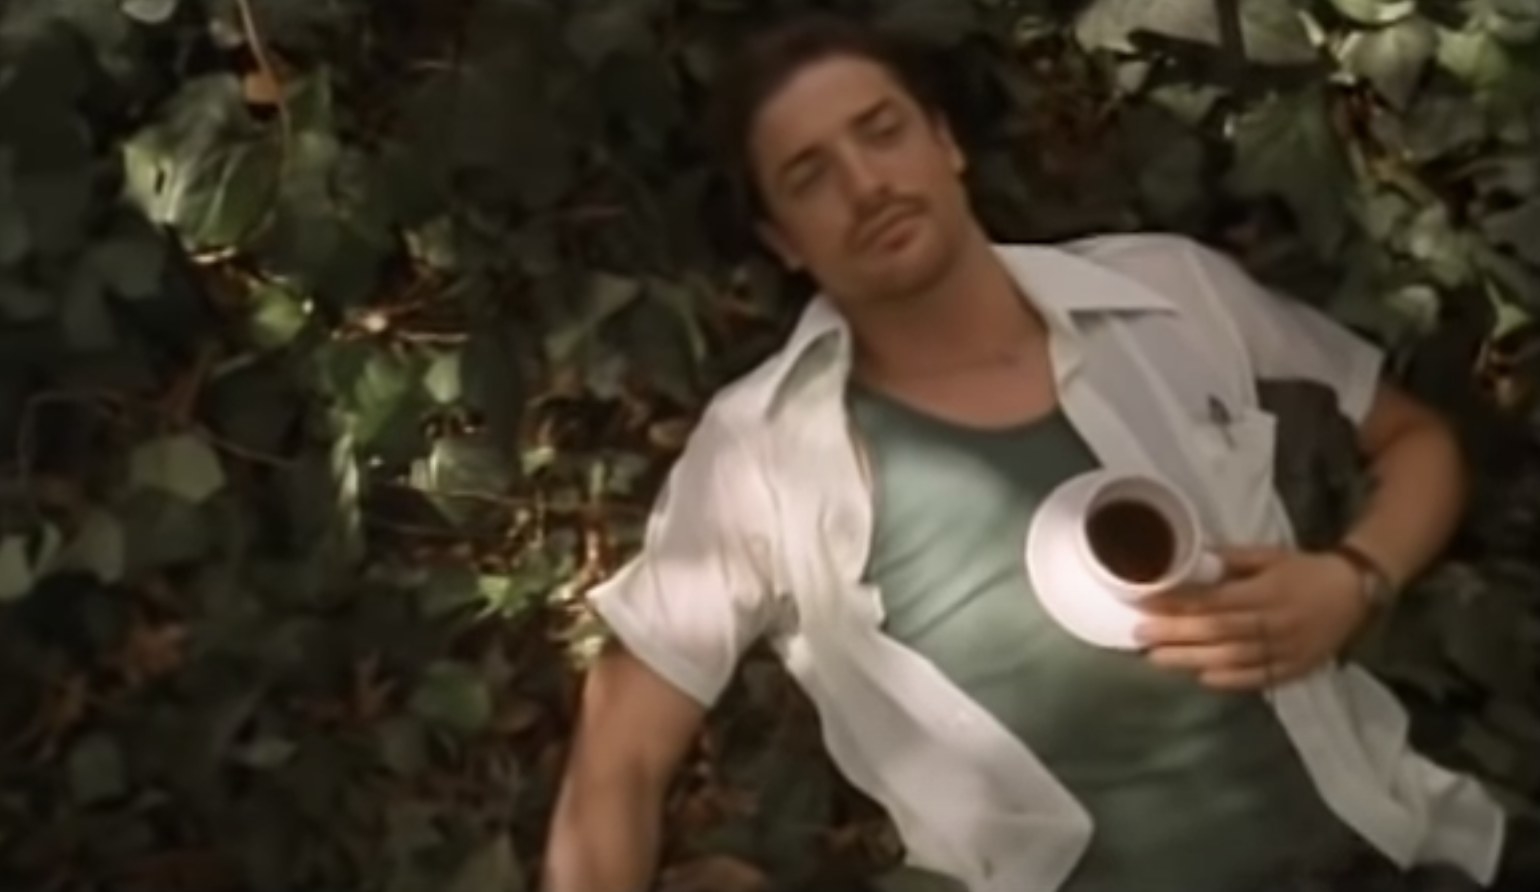 Brendan Fraser lies on a pile of leaves with a cup of coffee balanced on his chest.